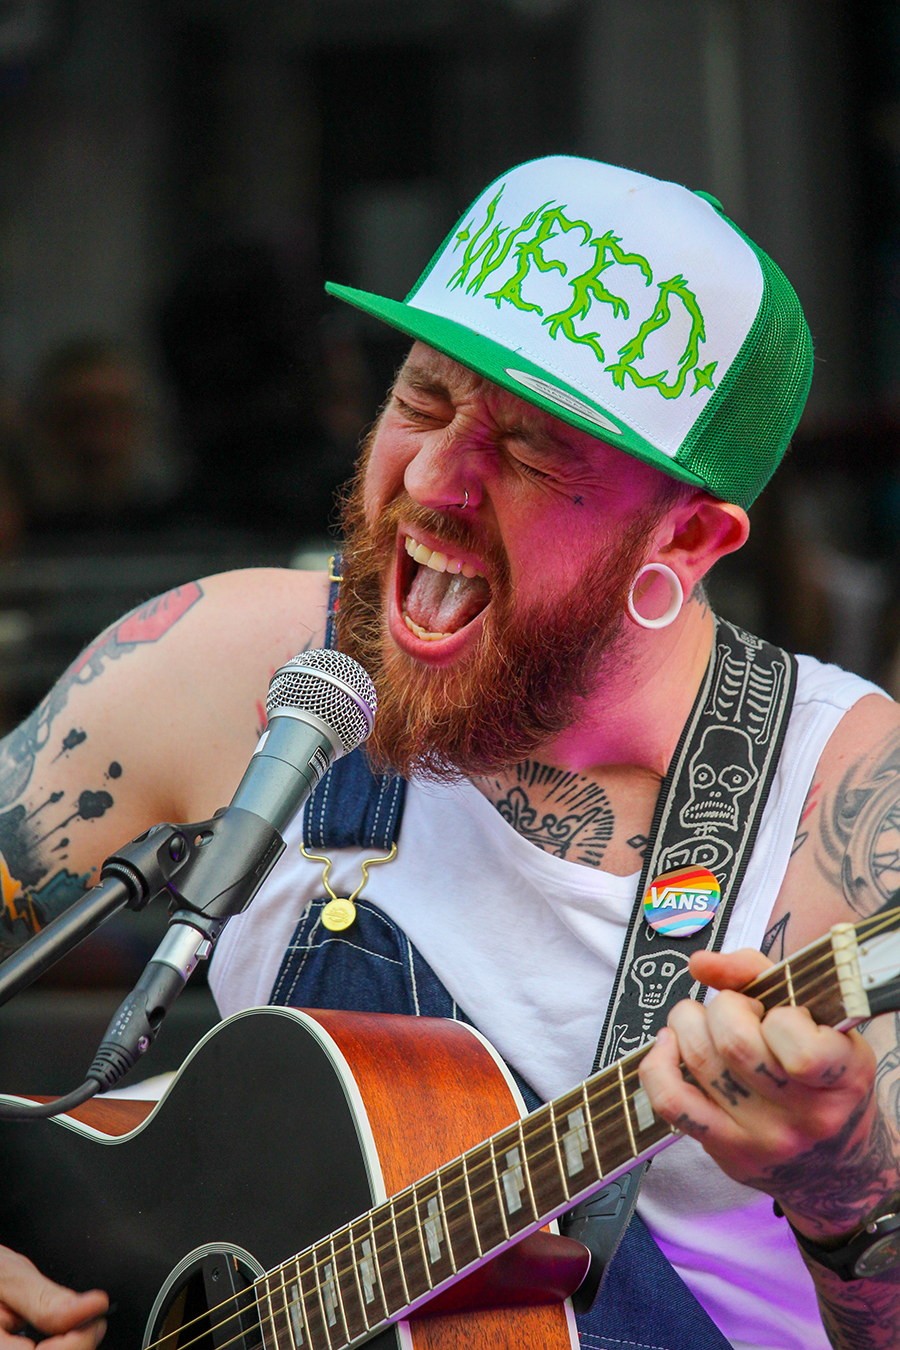 Rock singer and guitarist with a beard and a Weed cap during the 2023 Music Festival in Sarreguemines. ©2023 Mathieu Improvisato